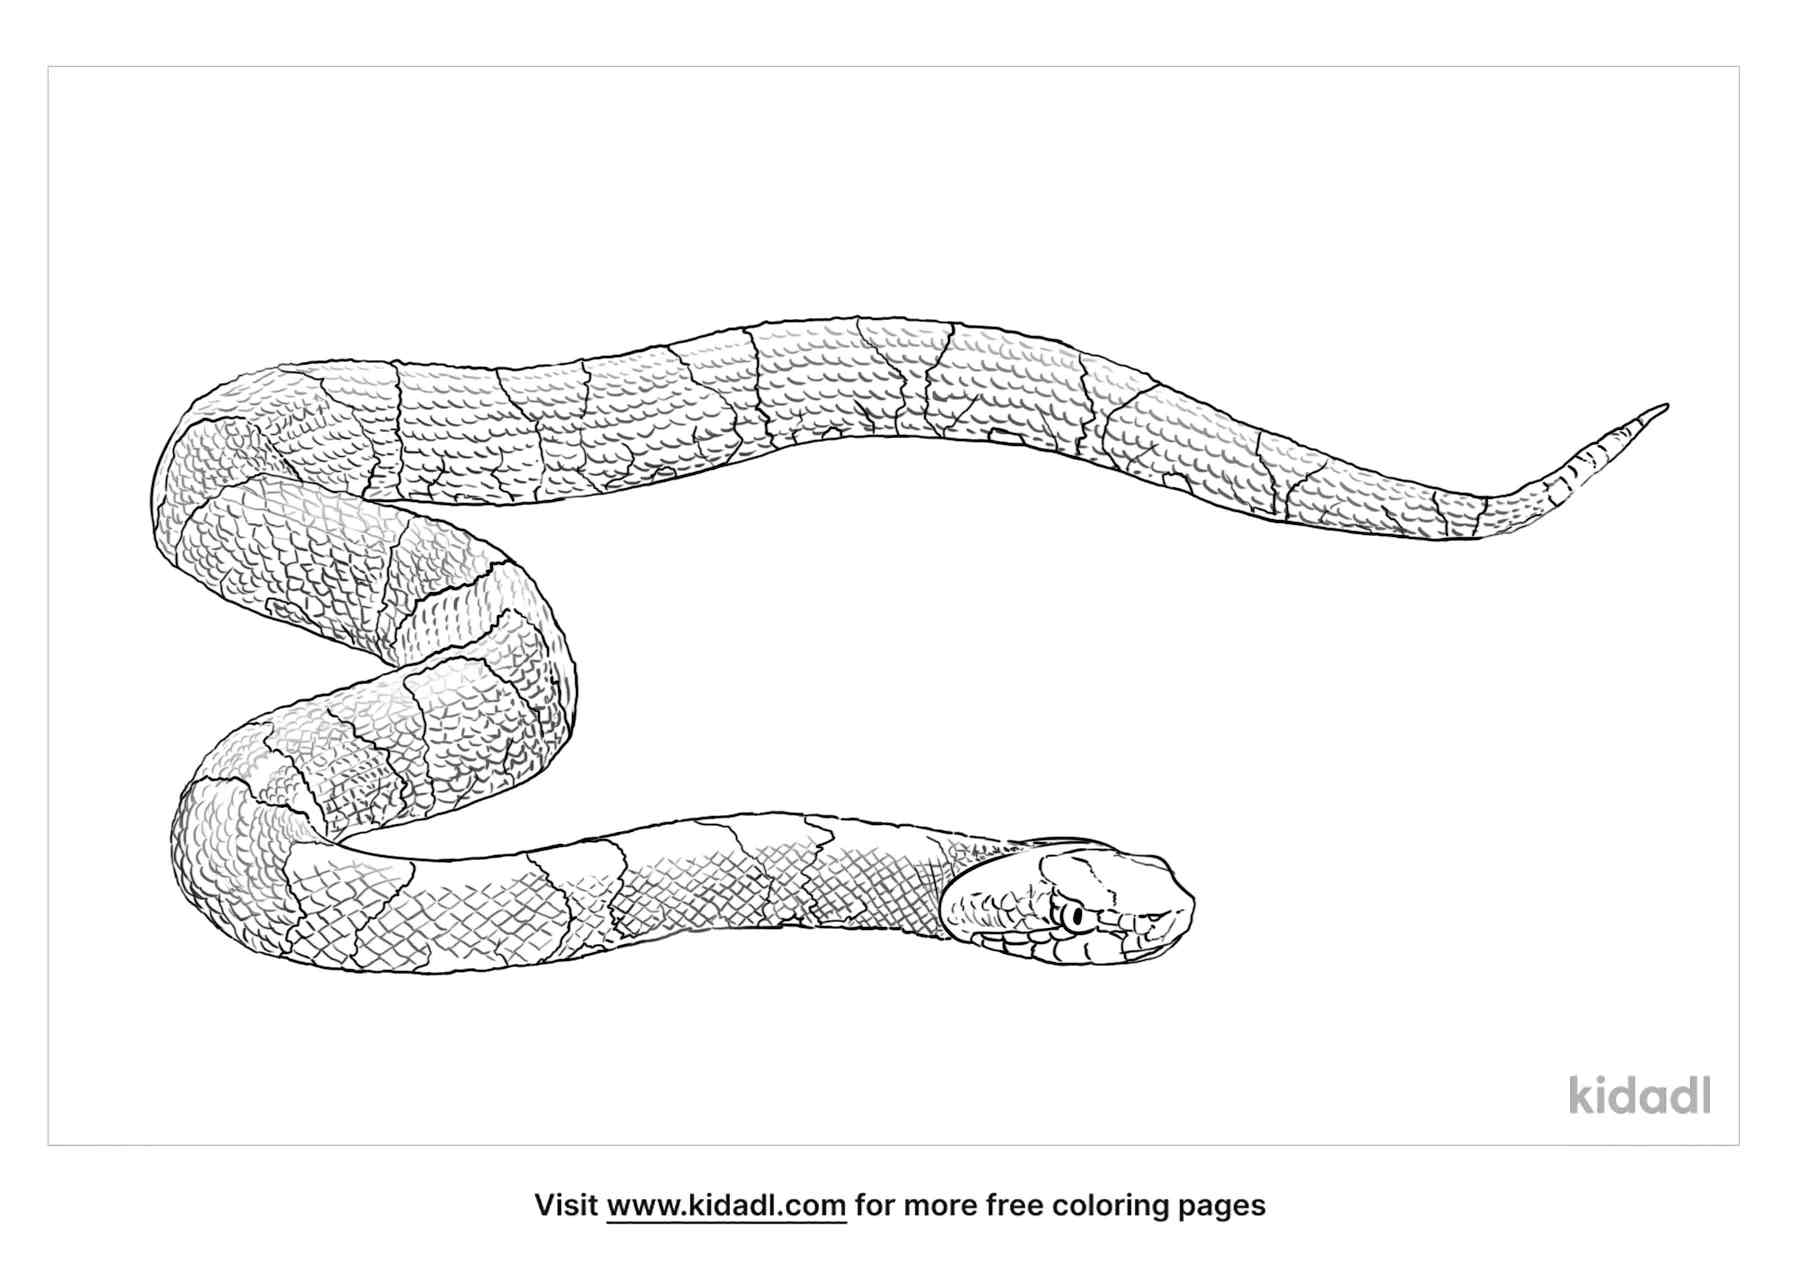 Copperhead Snake coloring page for kids.